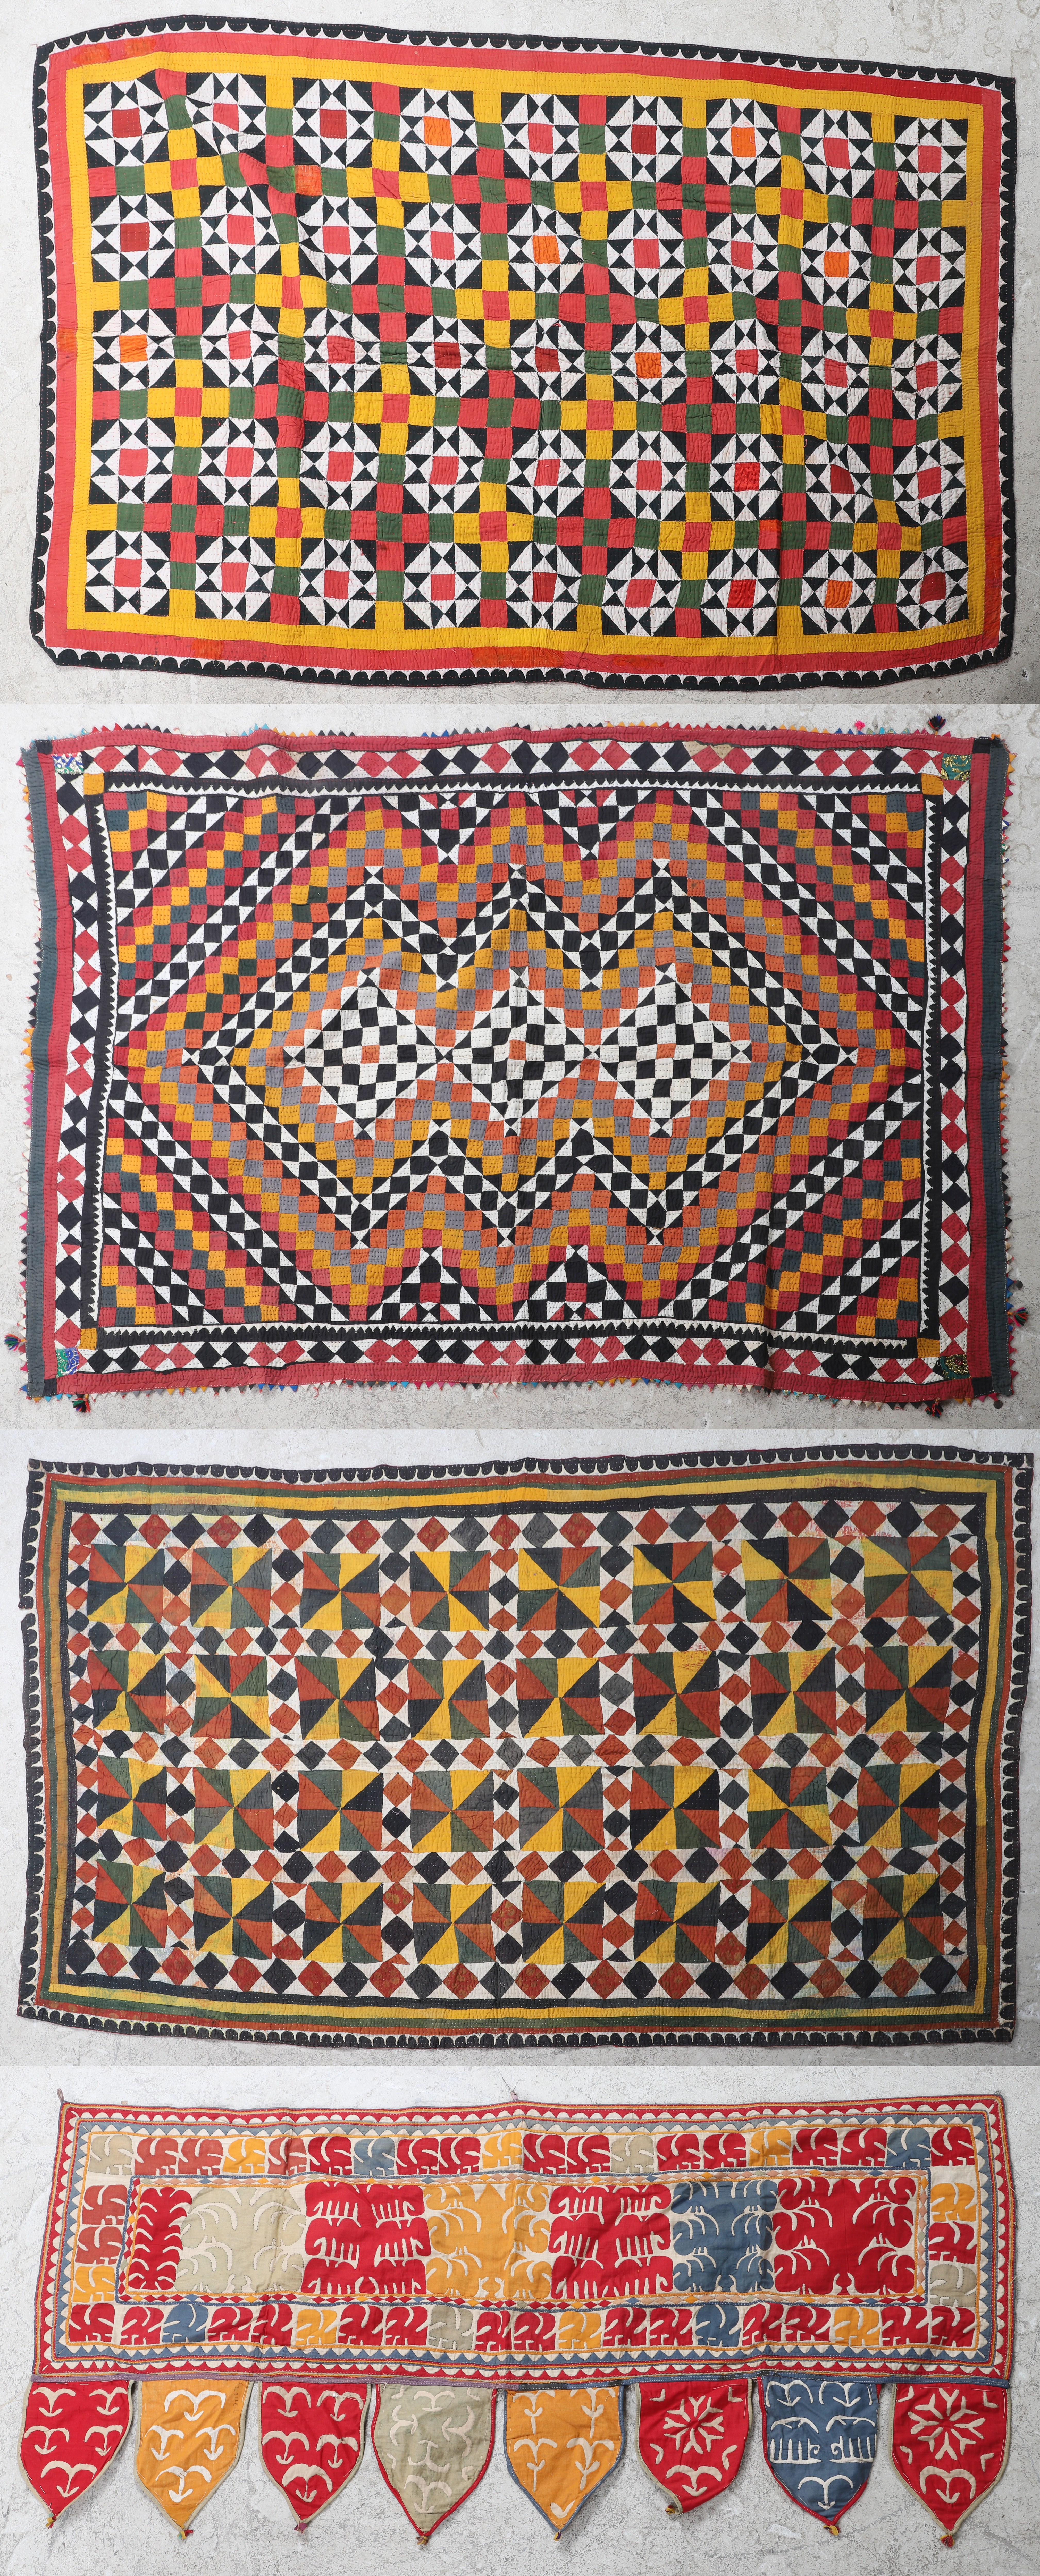  3 Ralli quilts and hanging to 3ca77a